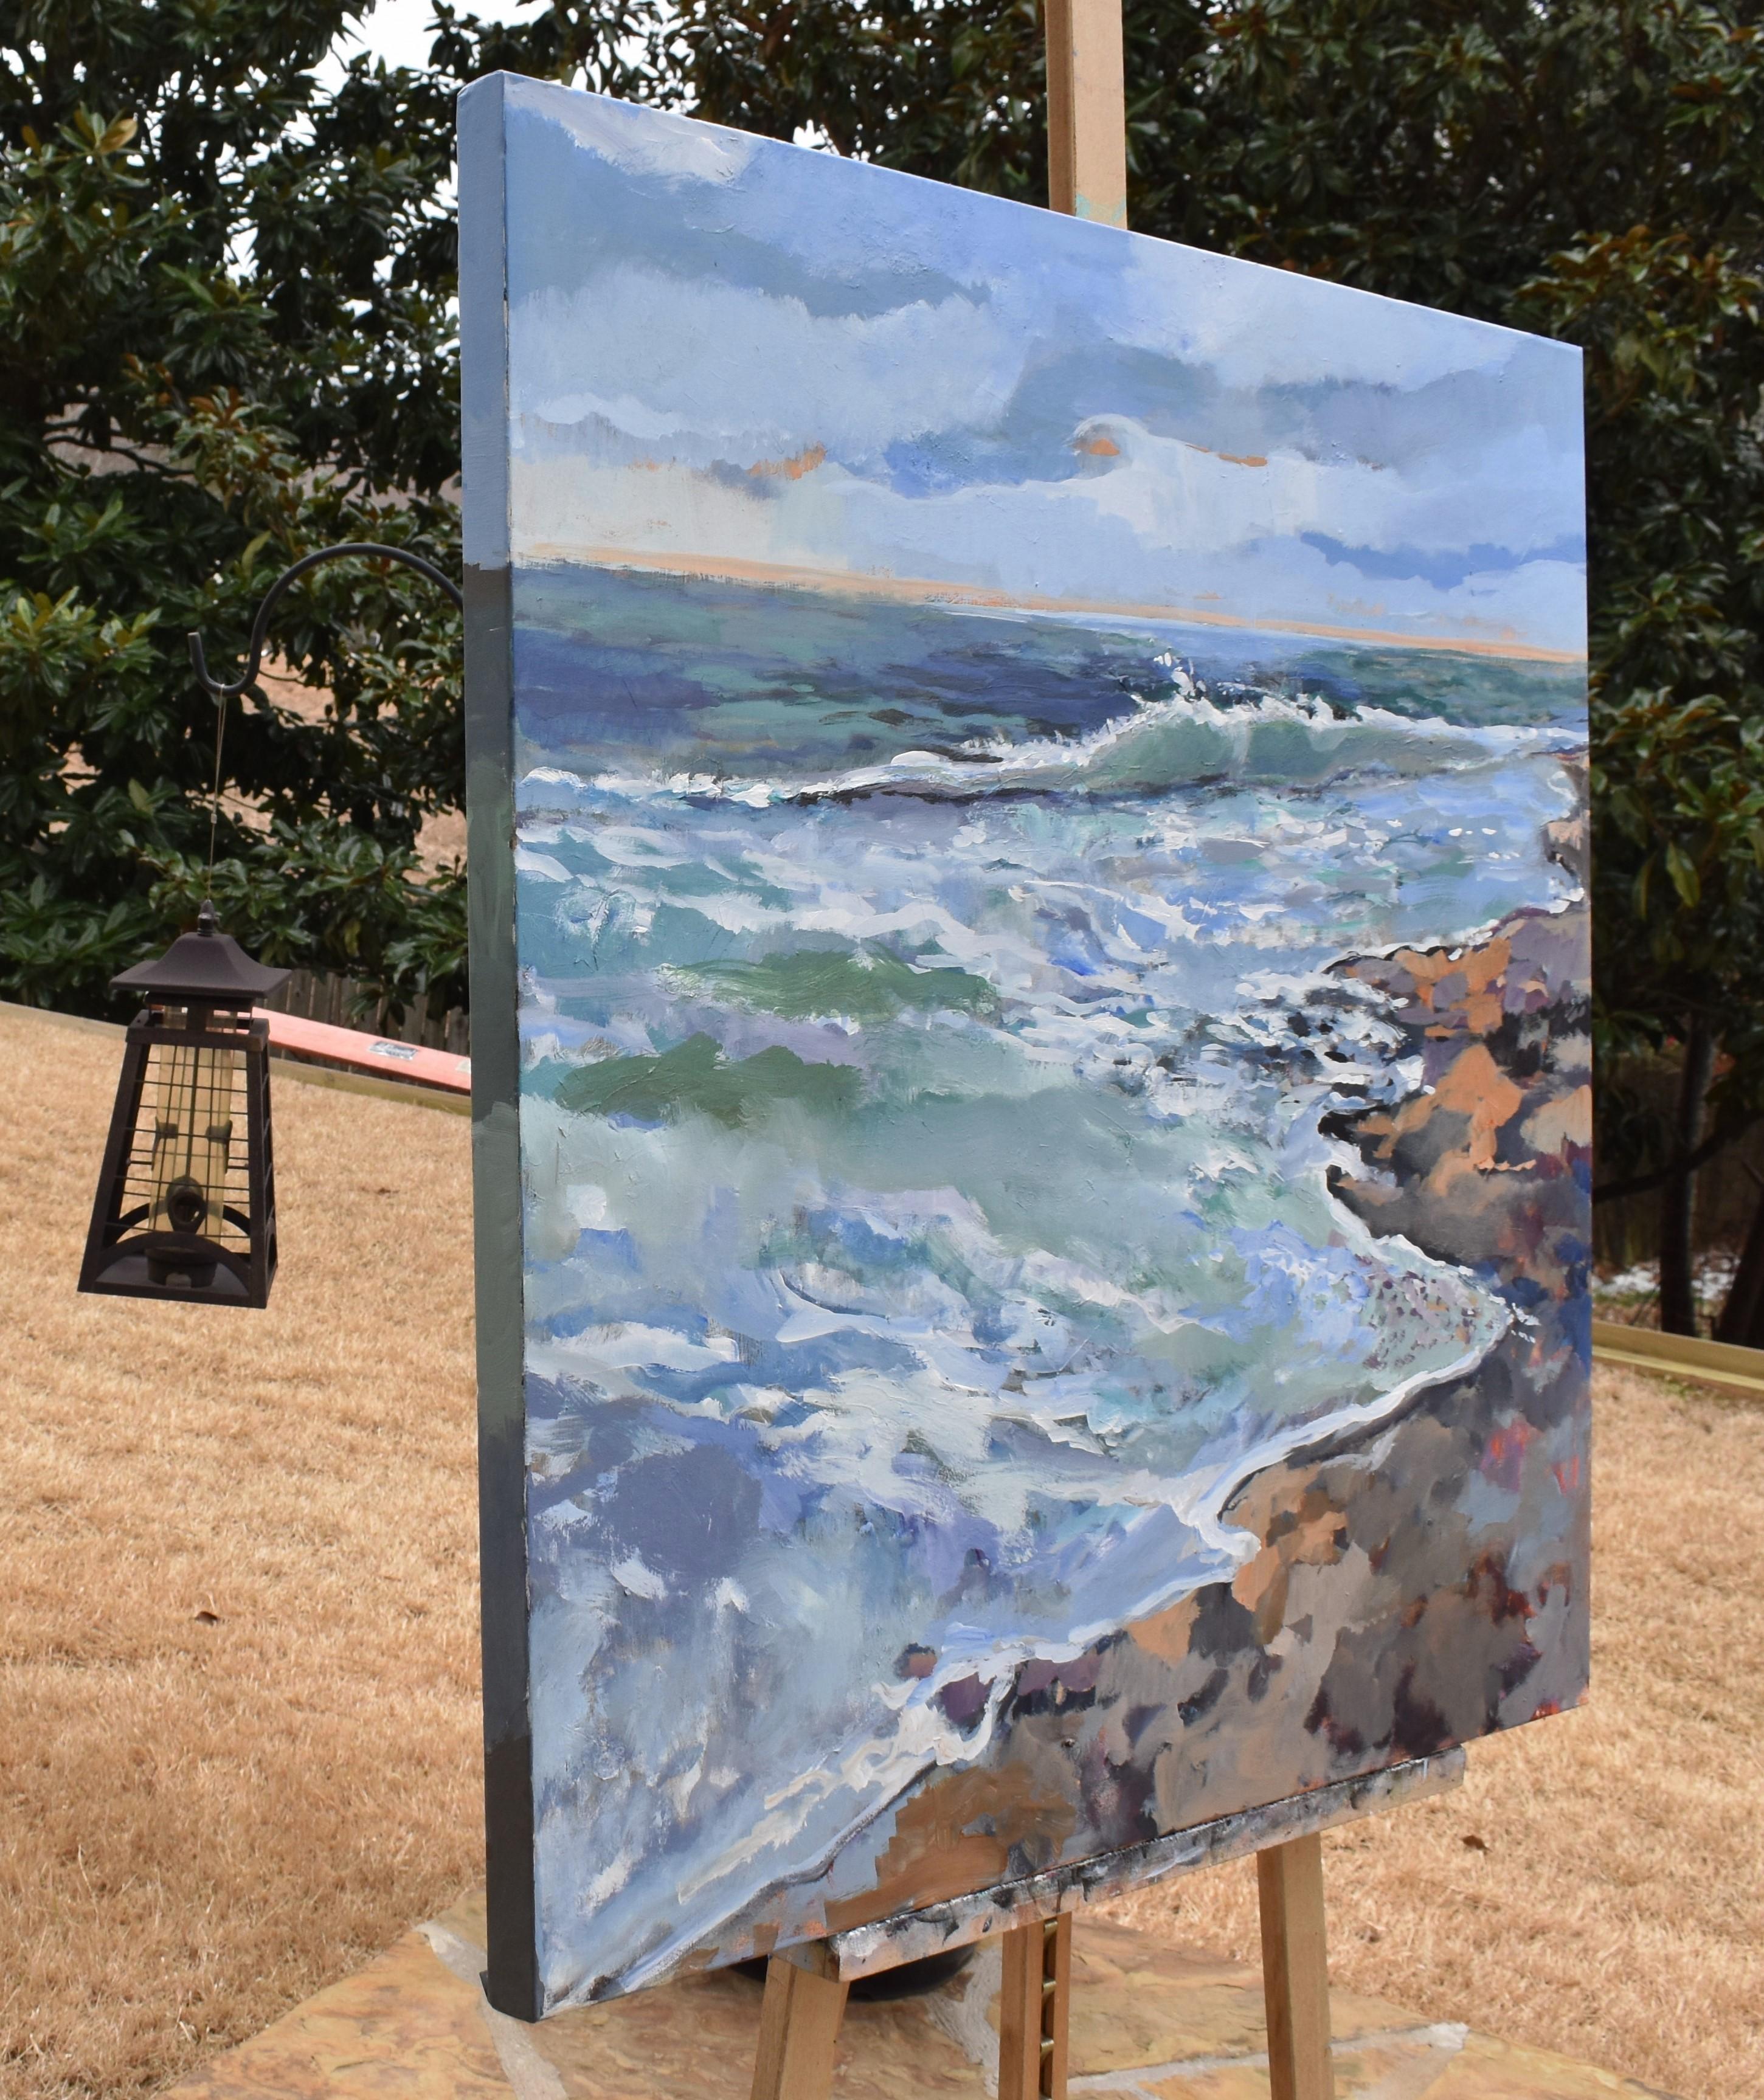 <p>Artist Comments<br>Waves crash onto Blowing Rock Beach, leaving traces of sea foam in their path. The bold brushwork mimics the relentless power and energetic nature of the sea. In awe of the tropical beauty, artist Mary Pratt captures this